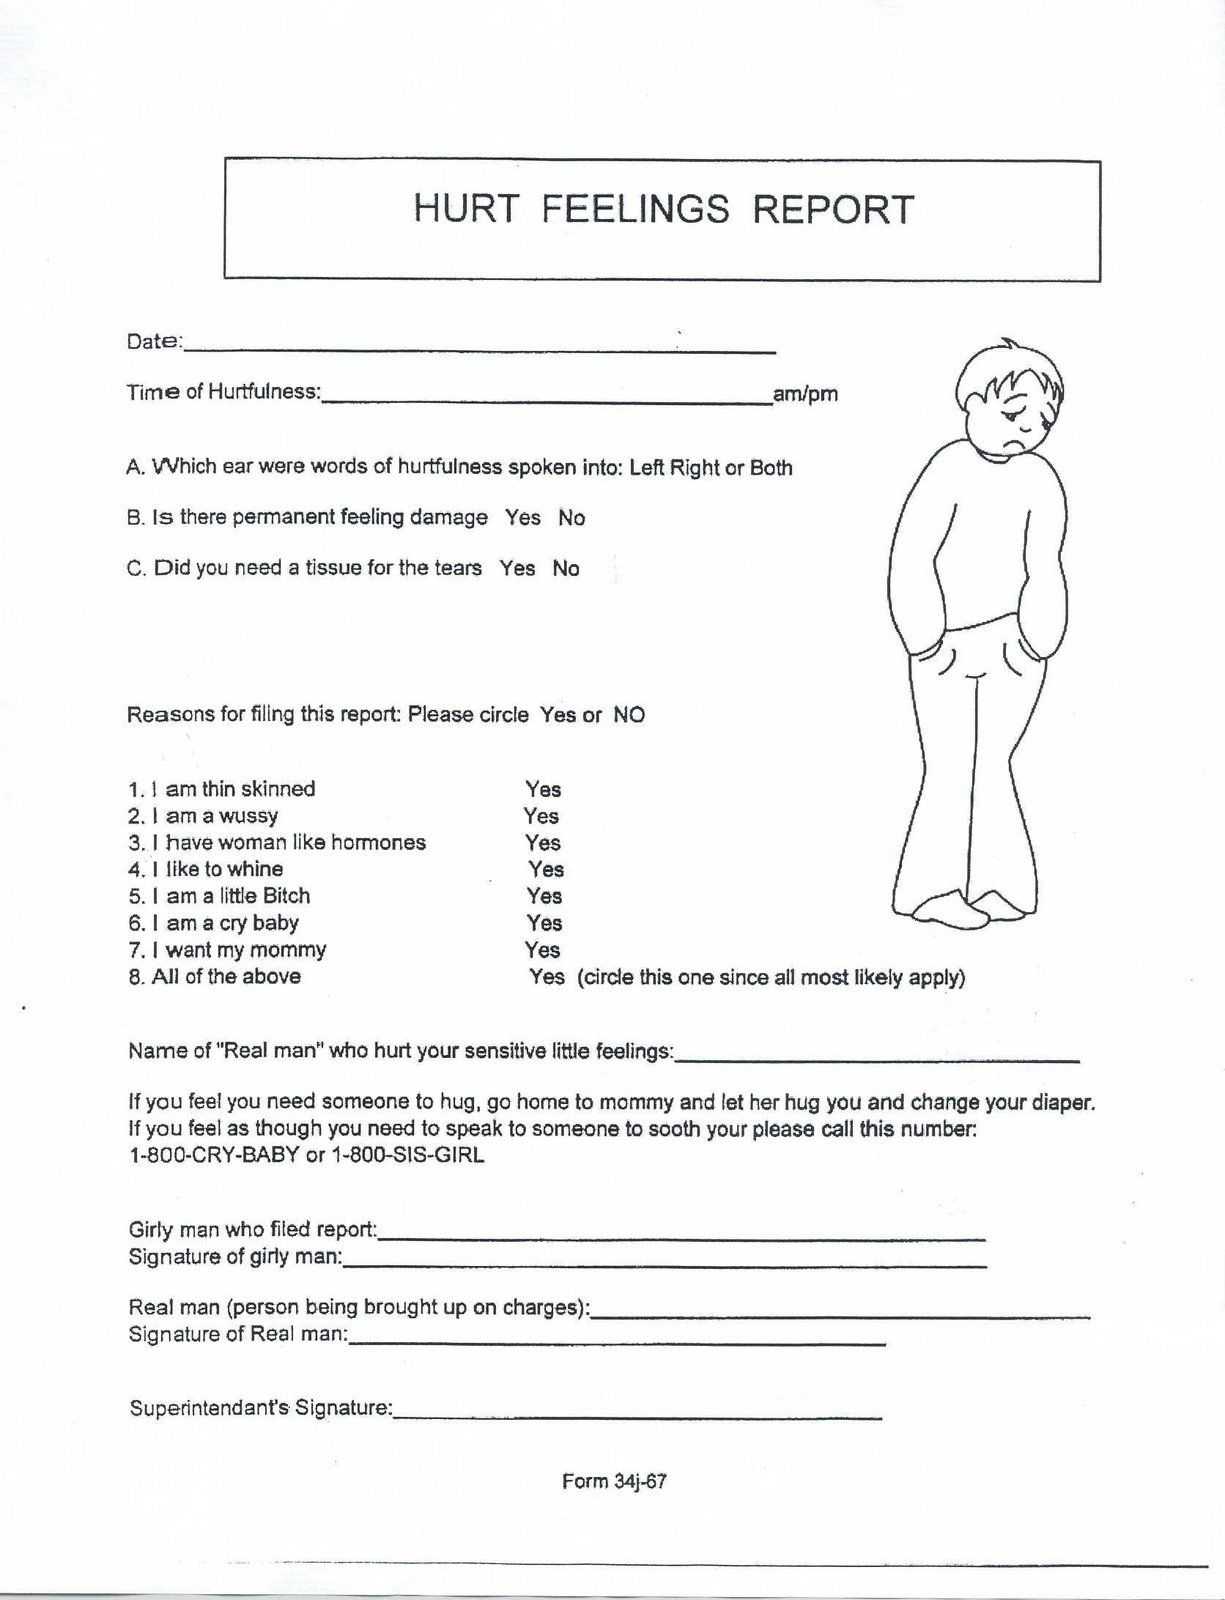 Pinamber Rollins On Diddles | Hurt Feelings, It Hurts Within Hurt Feelings Report Template